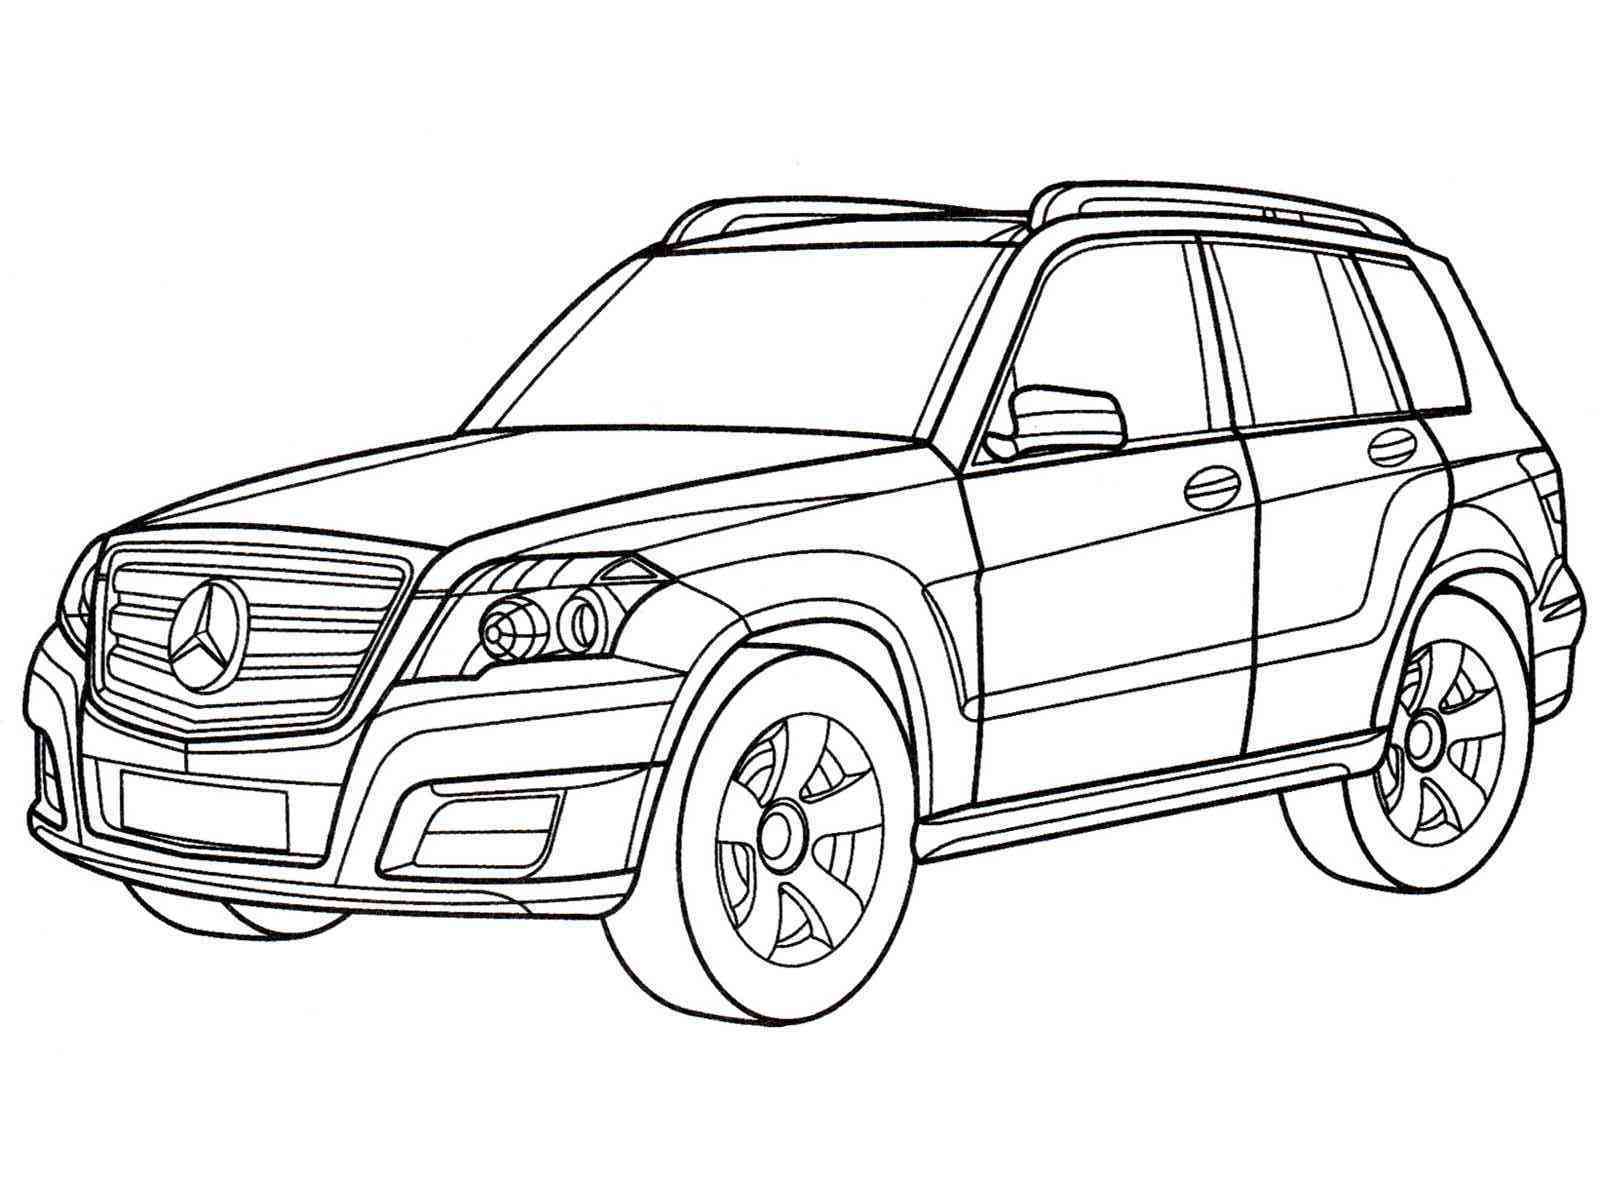 Mercedes coloring pages. Free Printable Mercedes coloring pages.